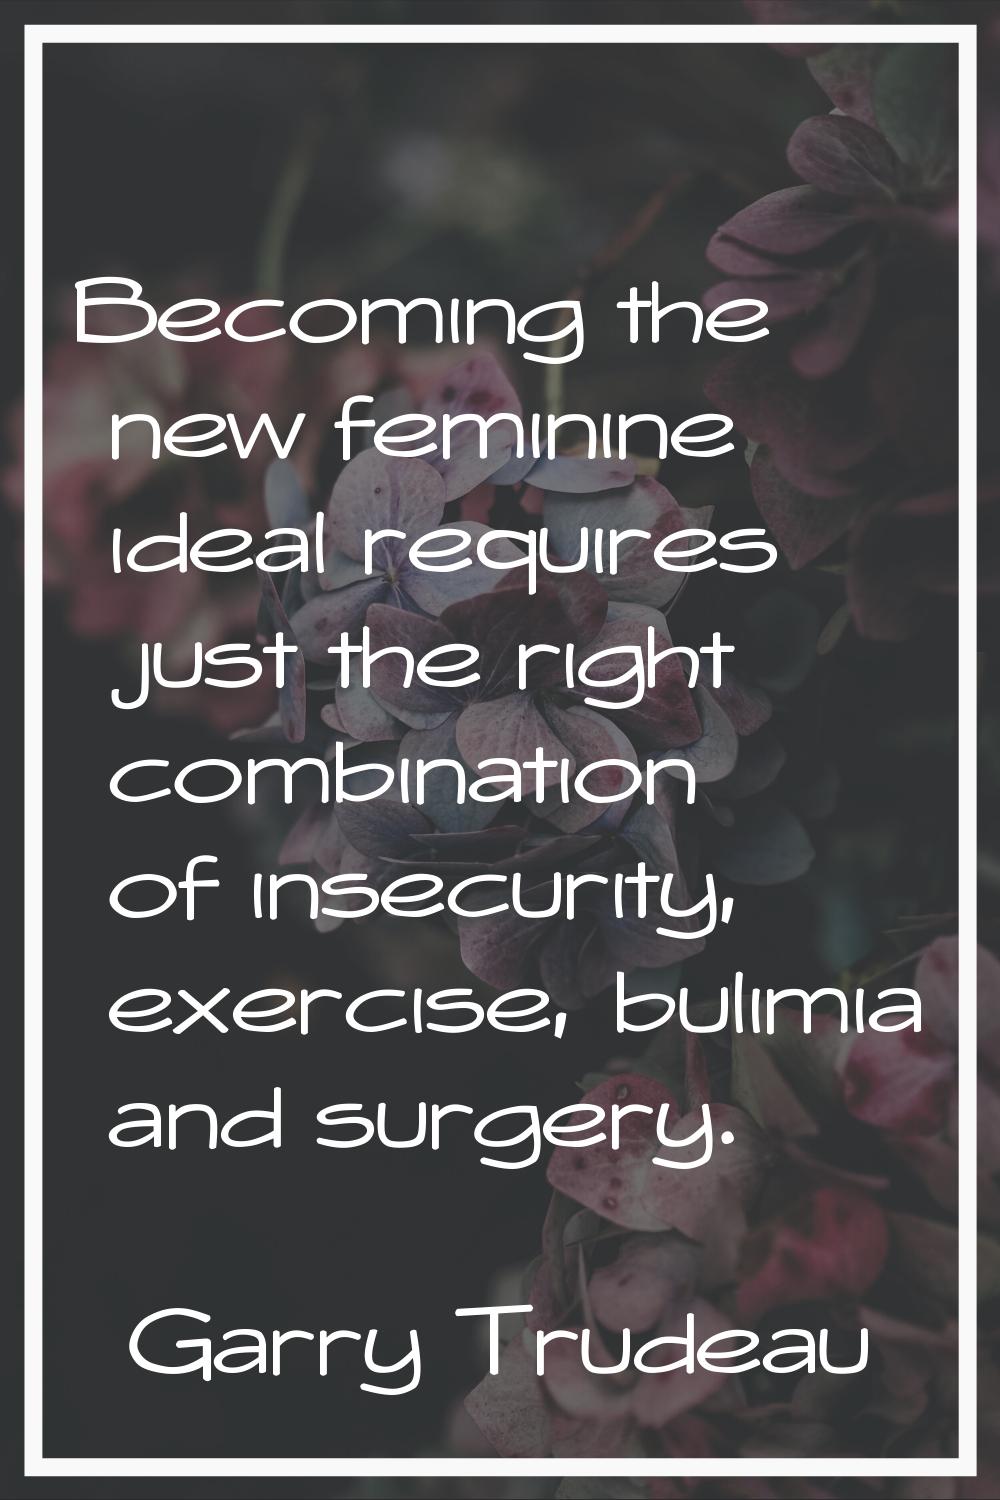 Becoming the new feminine ideal requires just the right combination of insecurity, exercise, bulimi